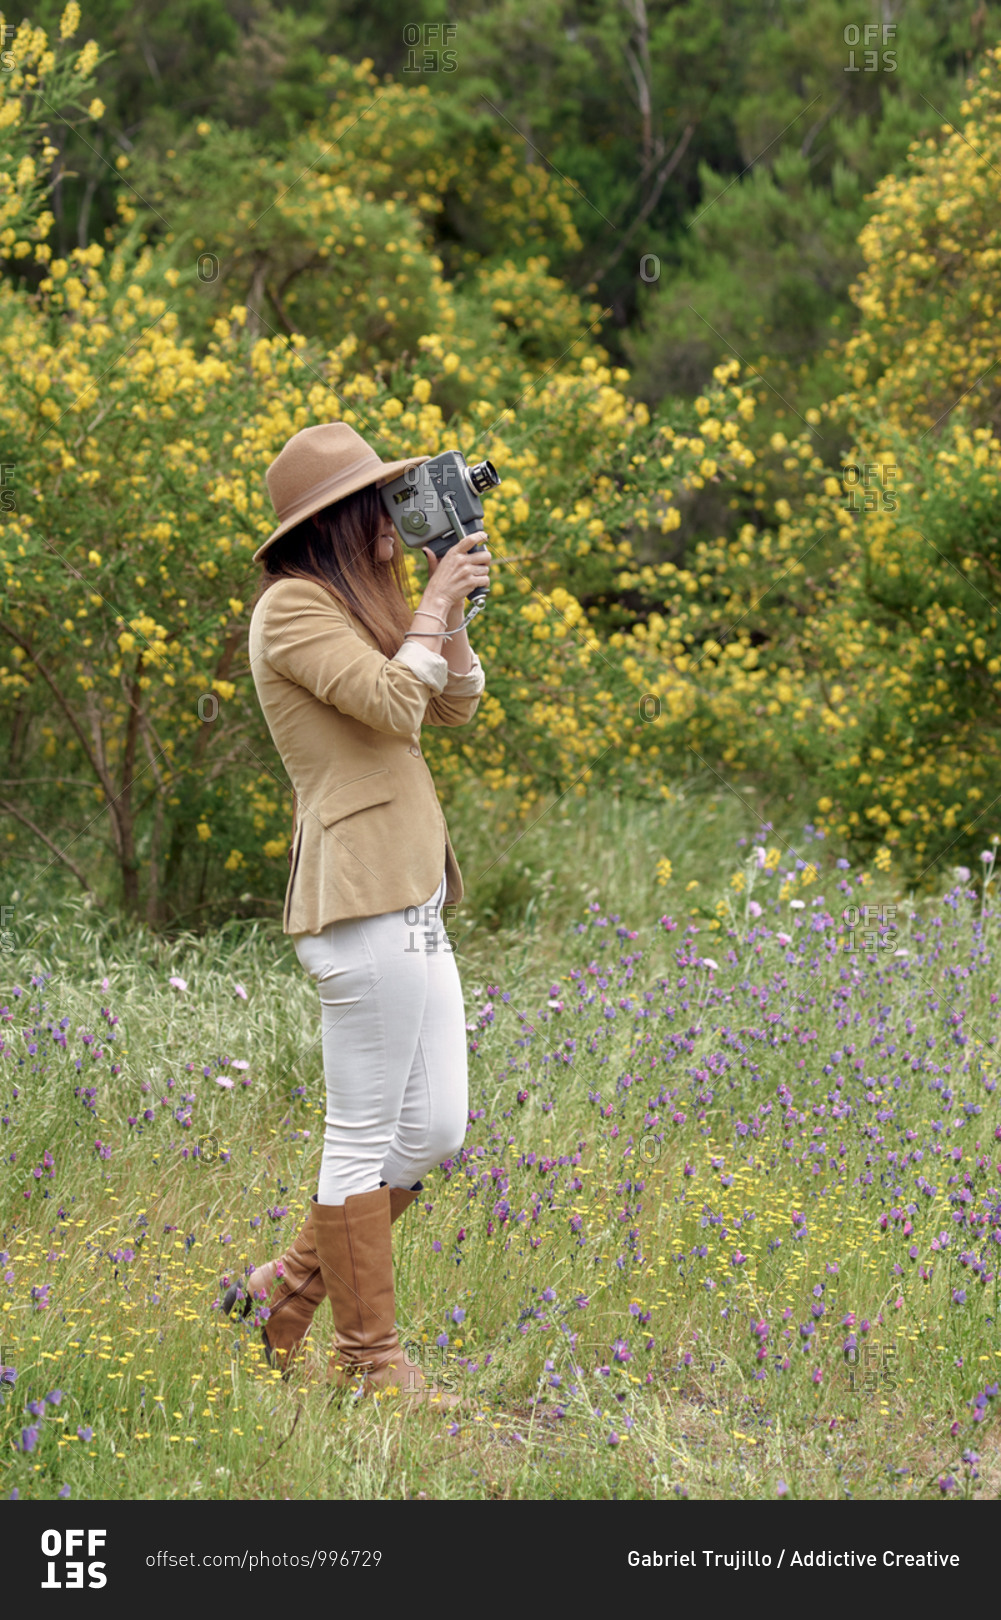 Female photographer in hat with closed eyes filming video with retro video camera while standing near trees with blooming yellow flowers in daylight